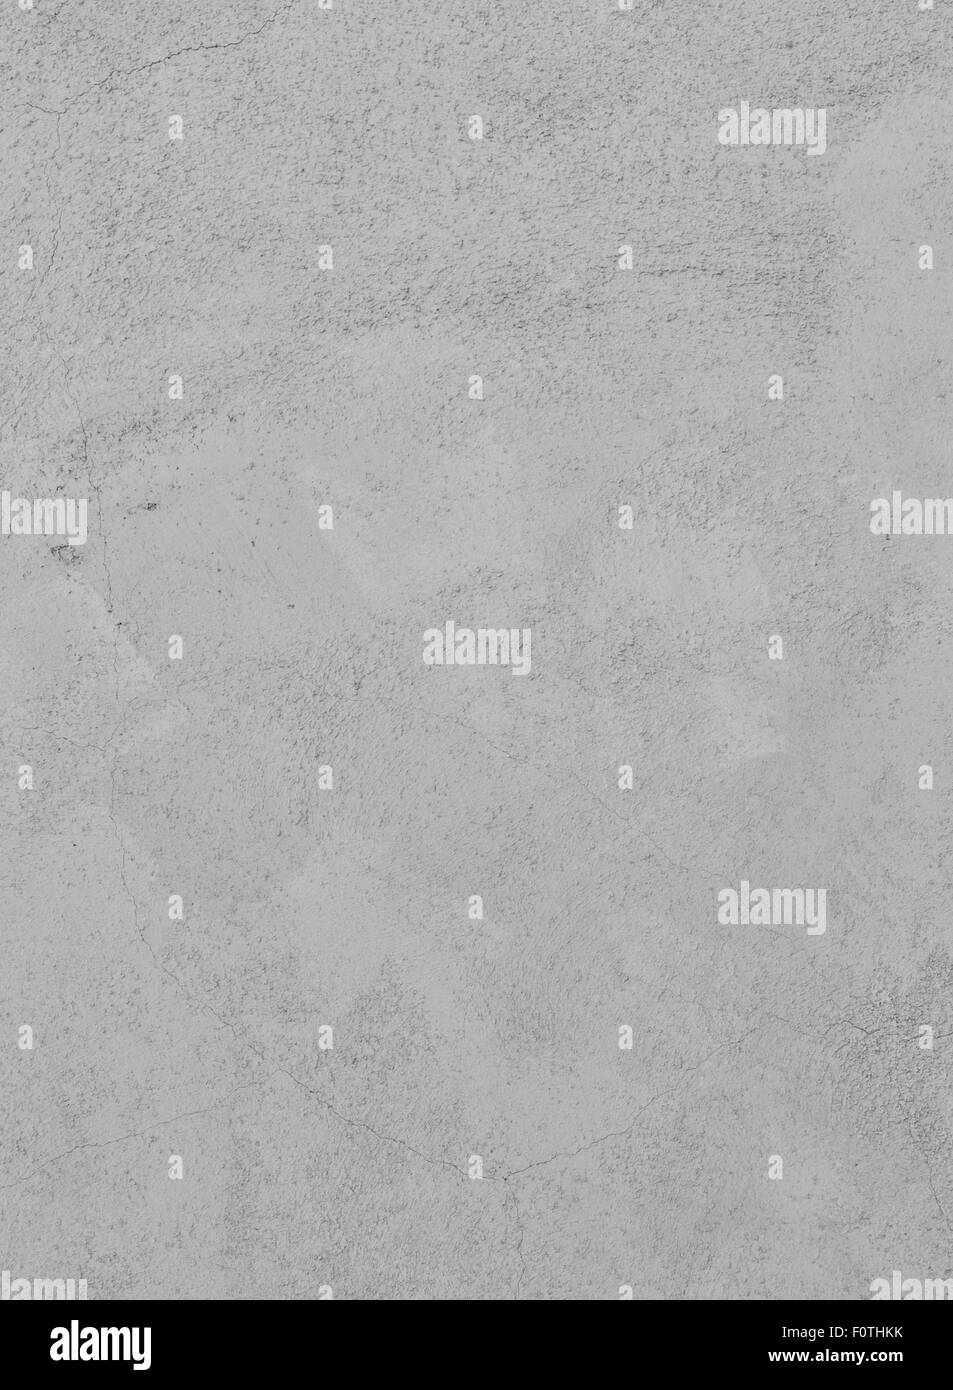 Stucco or render wall texture painted gray Stock Photo